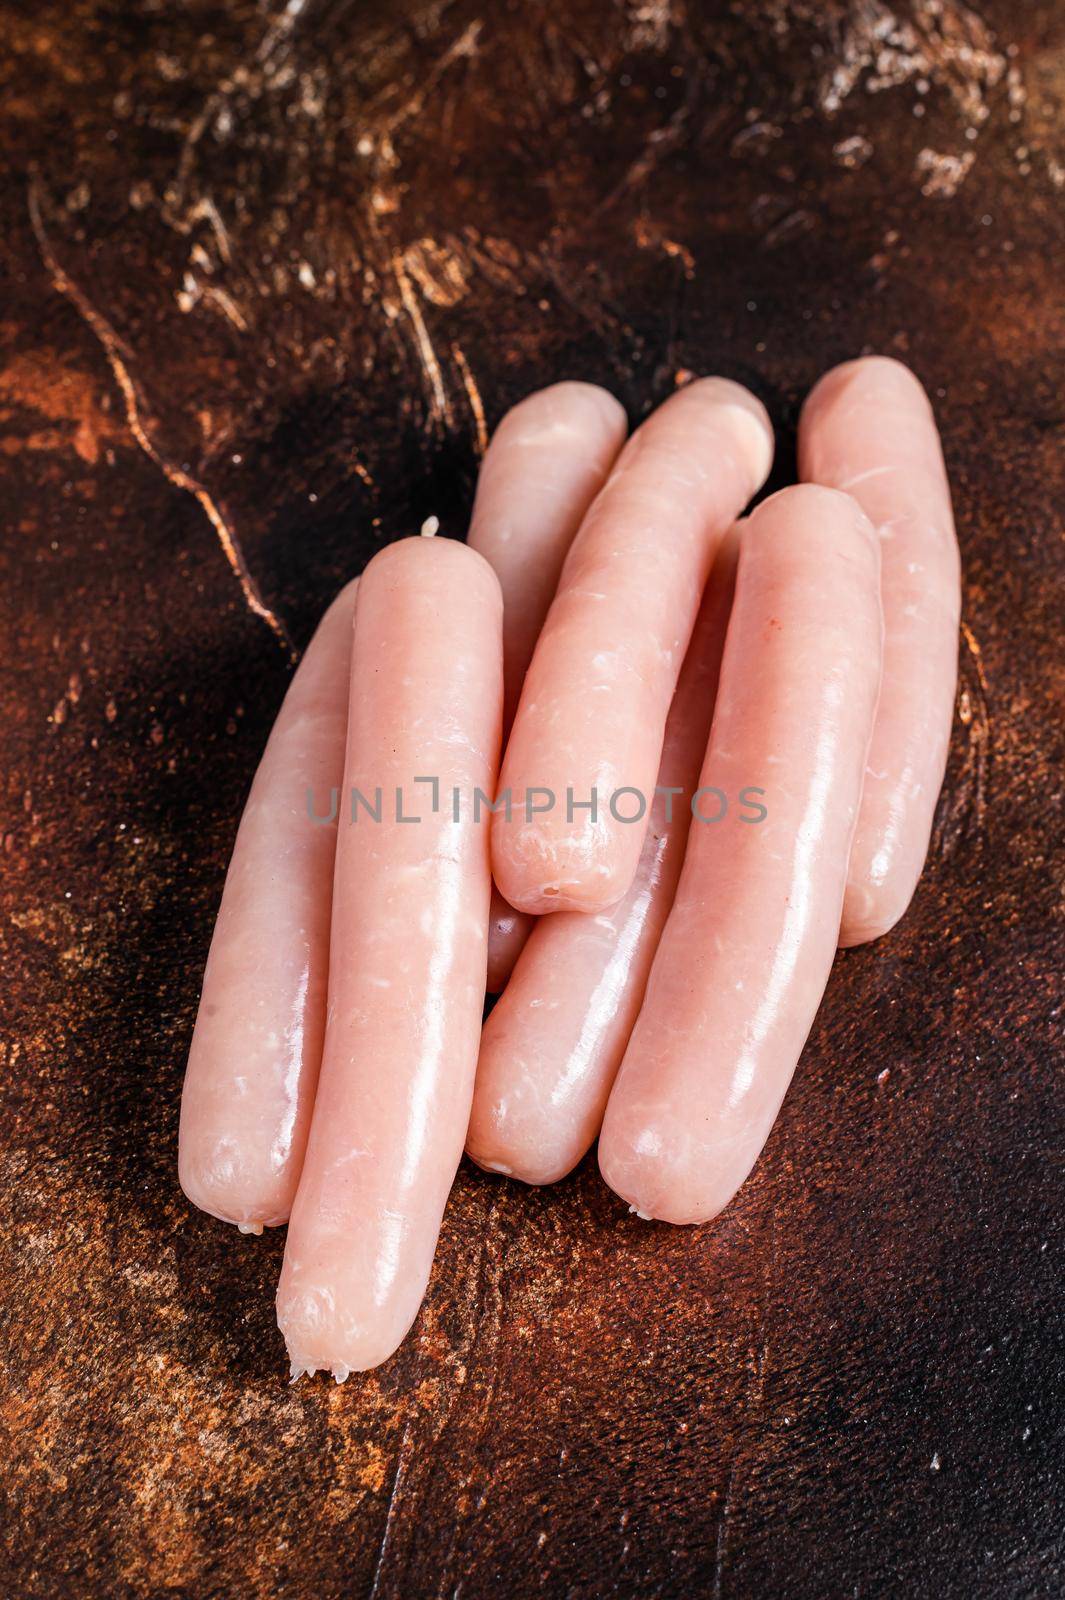 Raw chicken and turkey meat sausages on butcher table. Dark background. Top view.